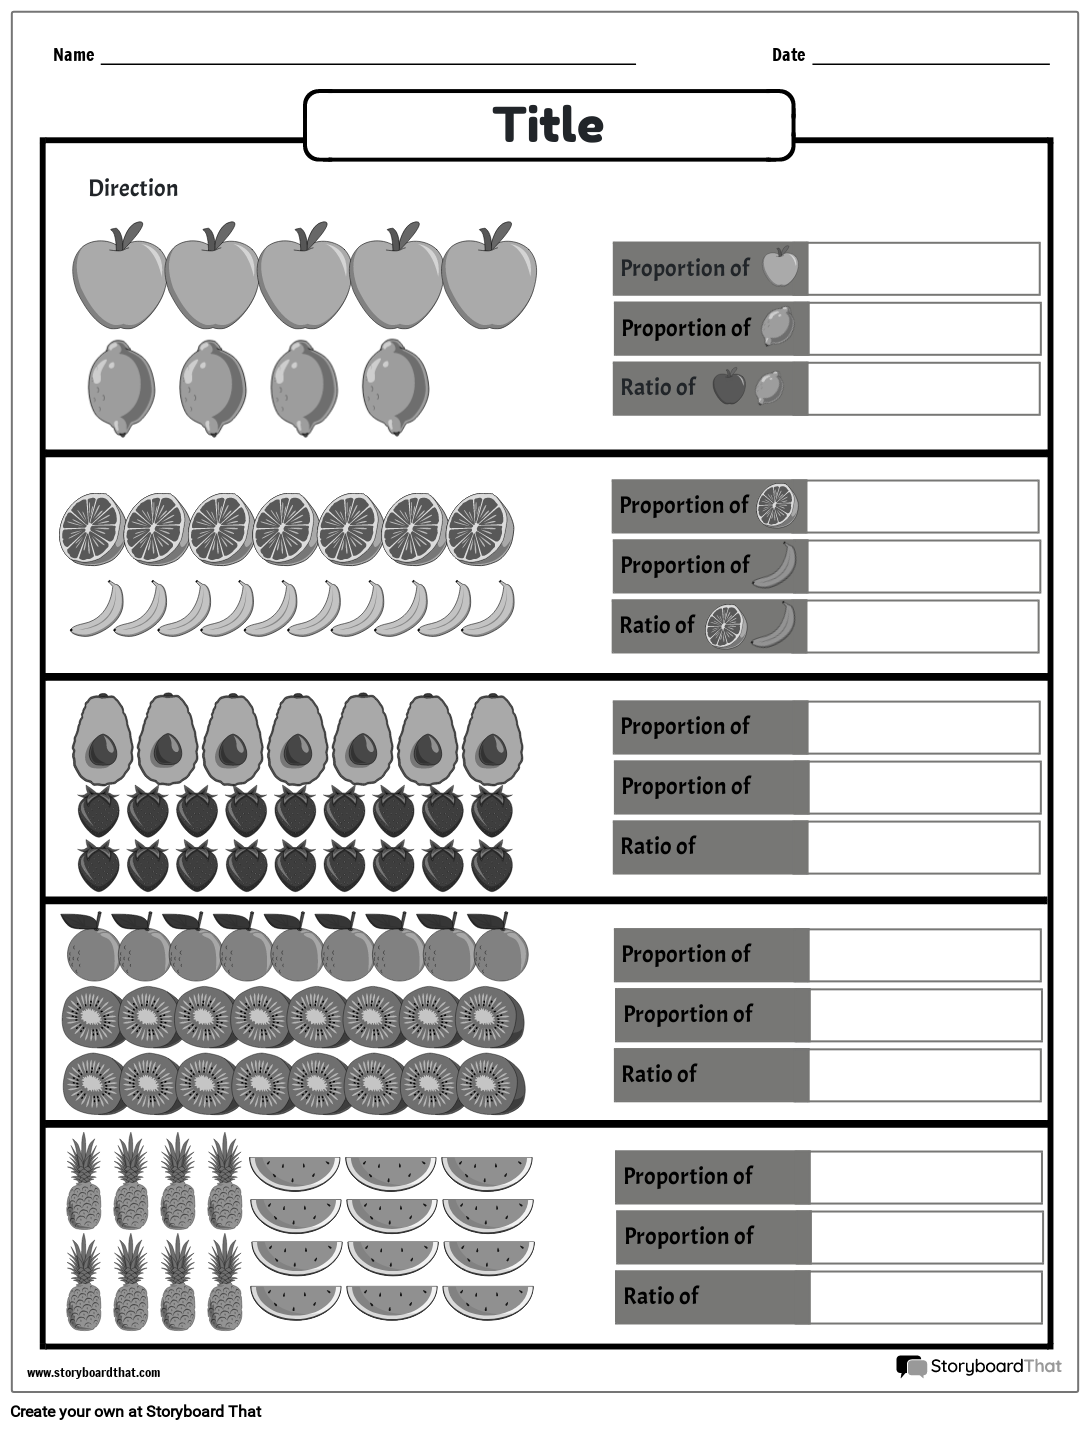 Fruit-themed Proportion Template